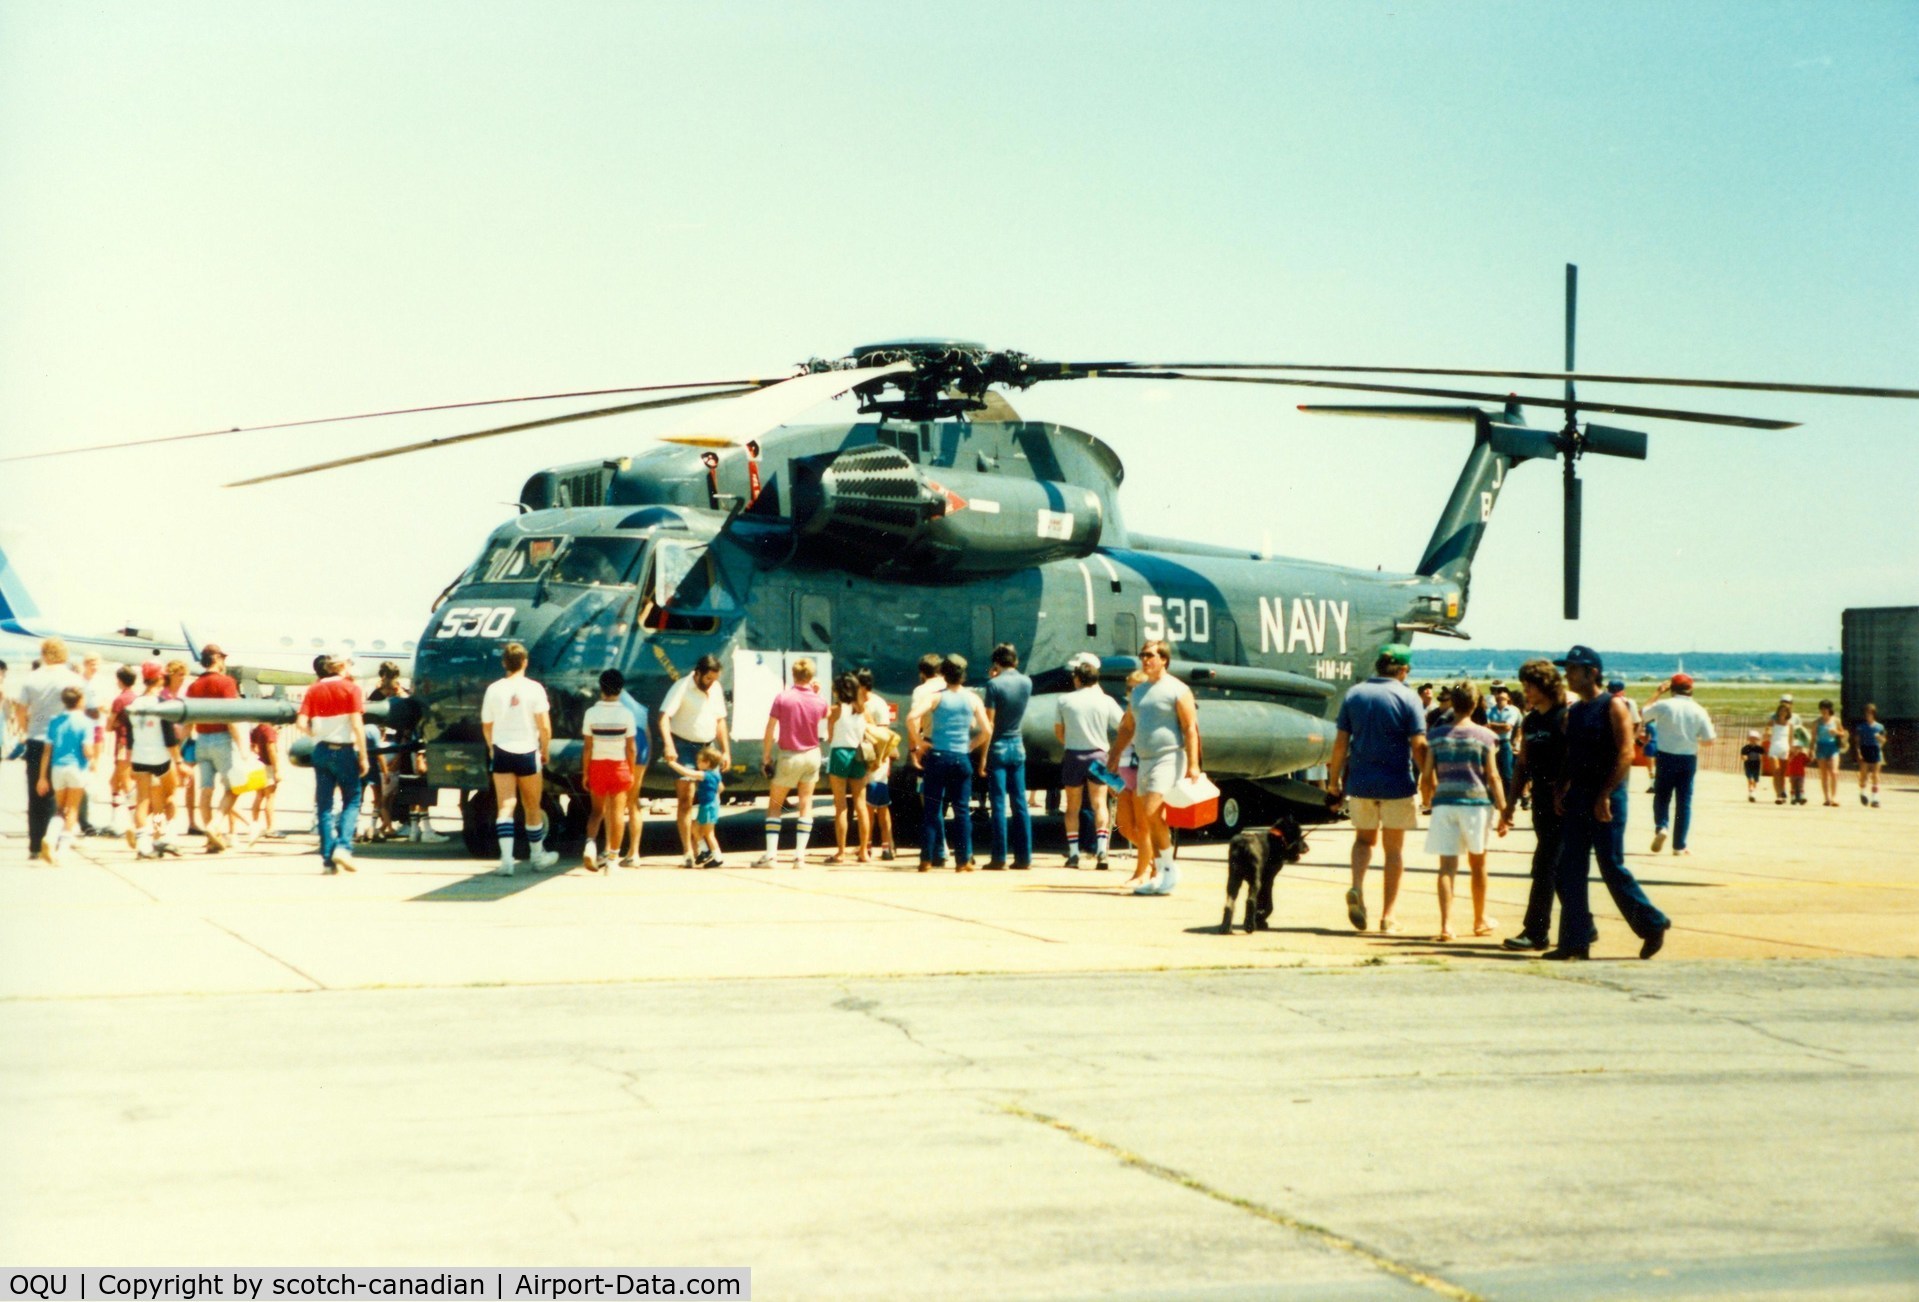 Quonset State Airport (OQU) - U.S. Navy Sikorsky RH-53D from Helicopter Mine Countermeasures Squadron 14 (HM-14) on display at Quonset State Airport, North Kingstown, RI - circa 1980's